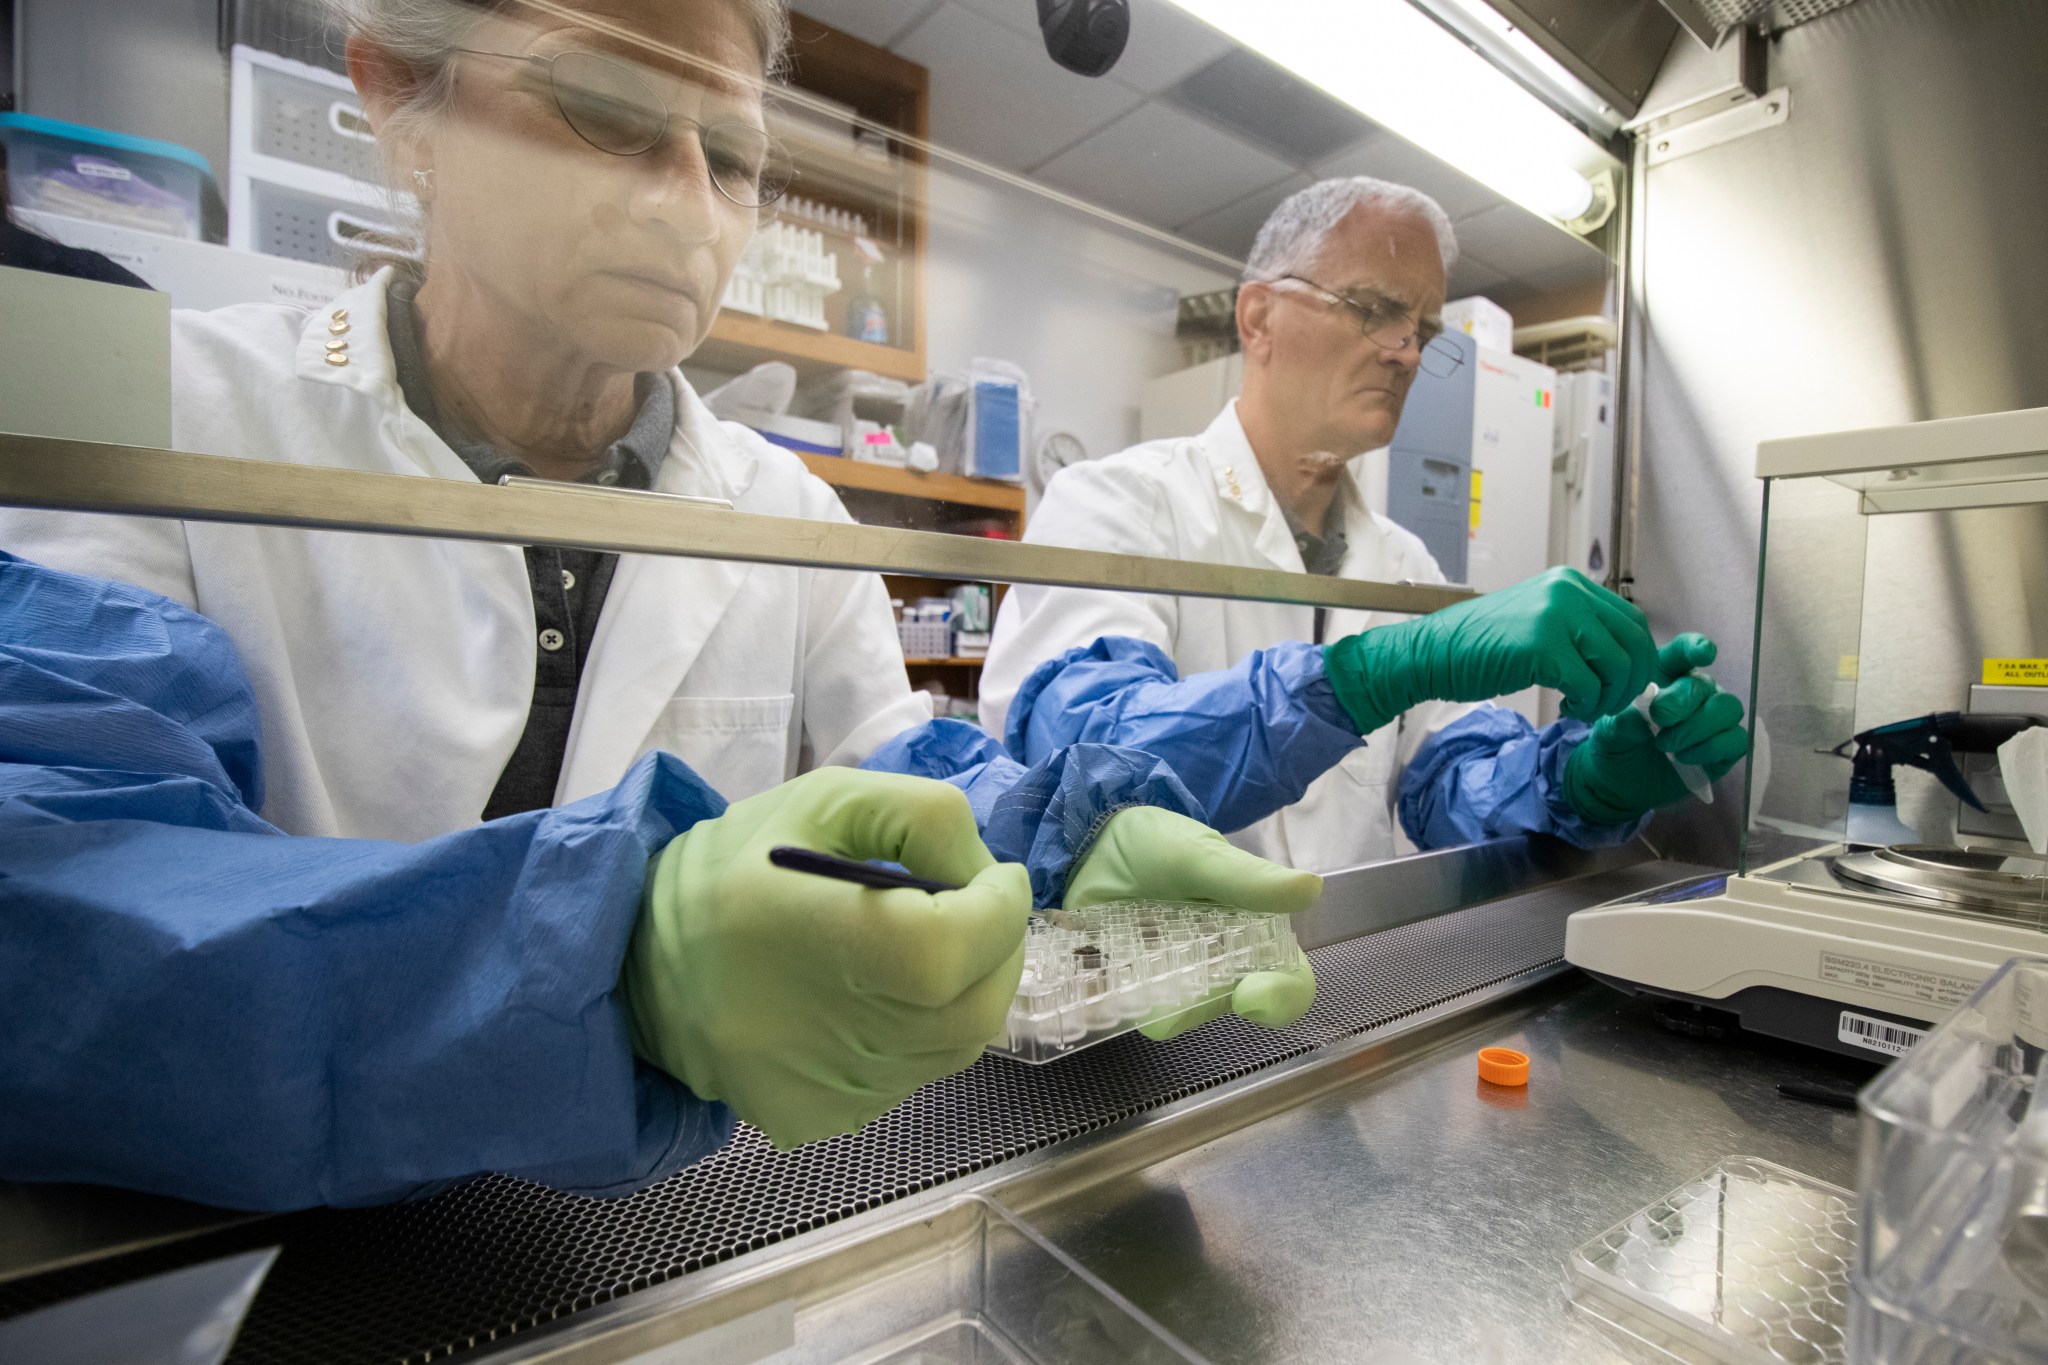 Two scientists, clad in lab coats, gloves, and protective sleeves on their arms work side-by-side at a bench under a protective hood or fume box. In the foreground, the scientist is handling a small clear box and tweezers. 